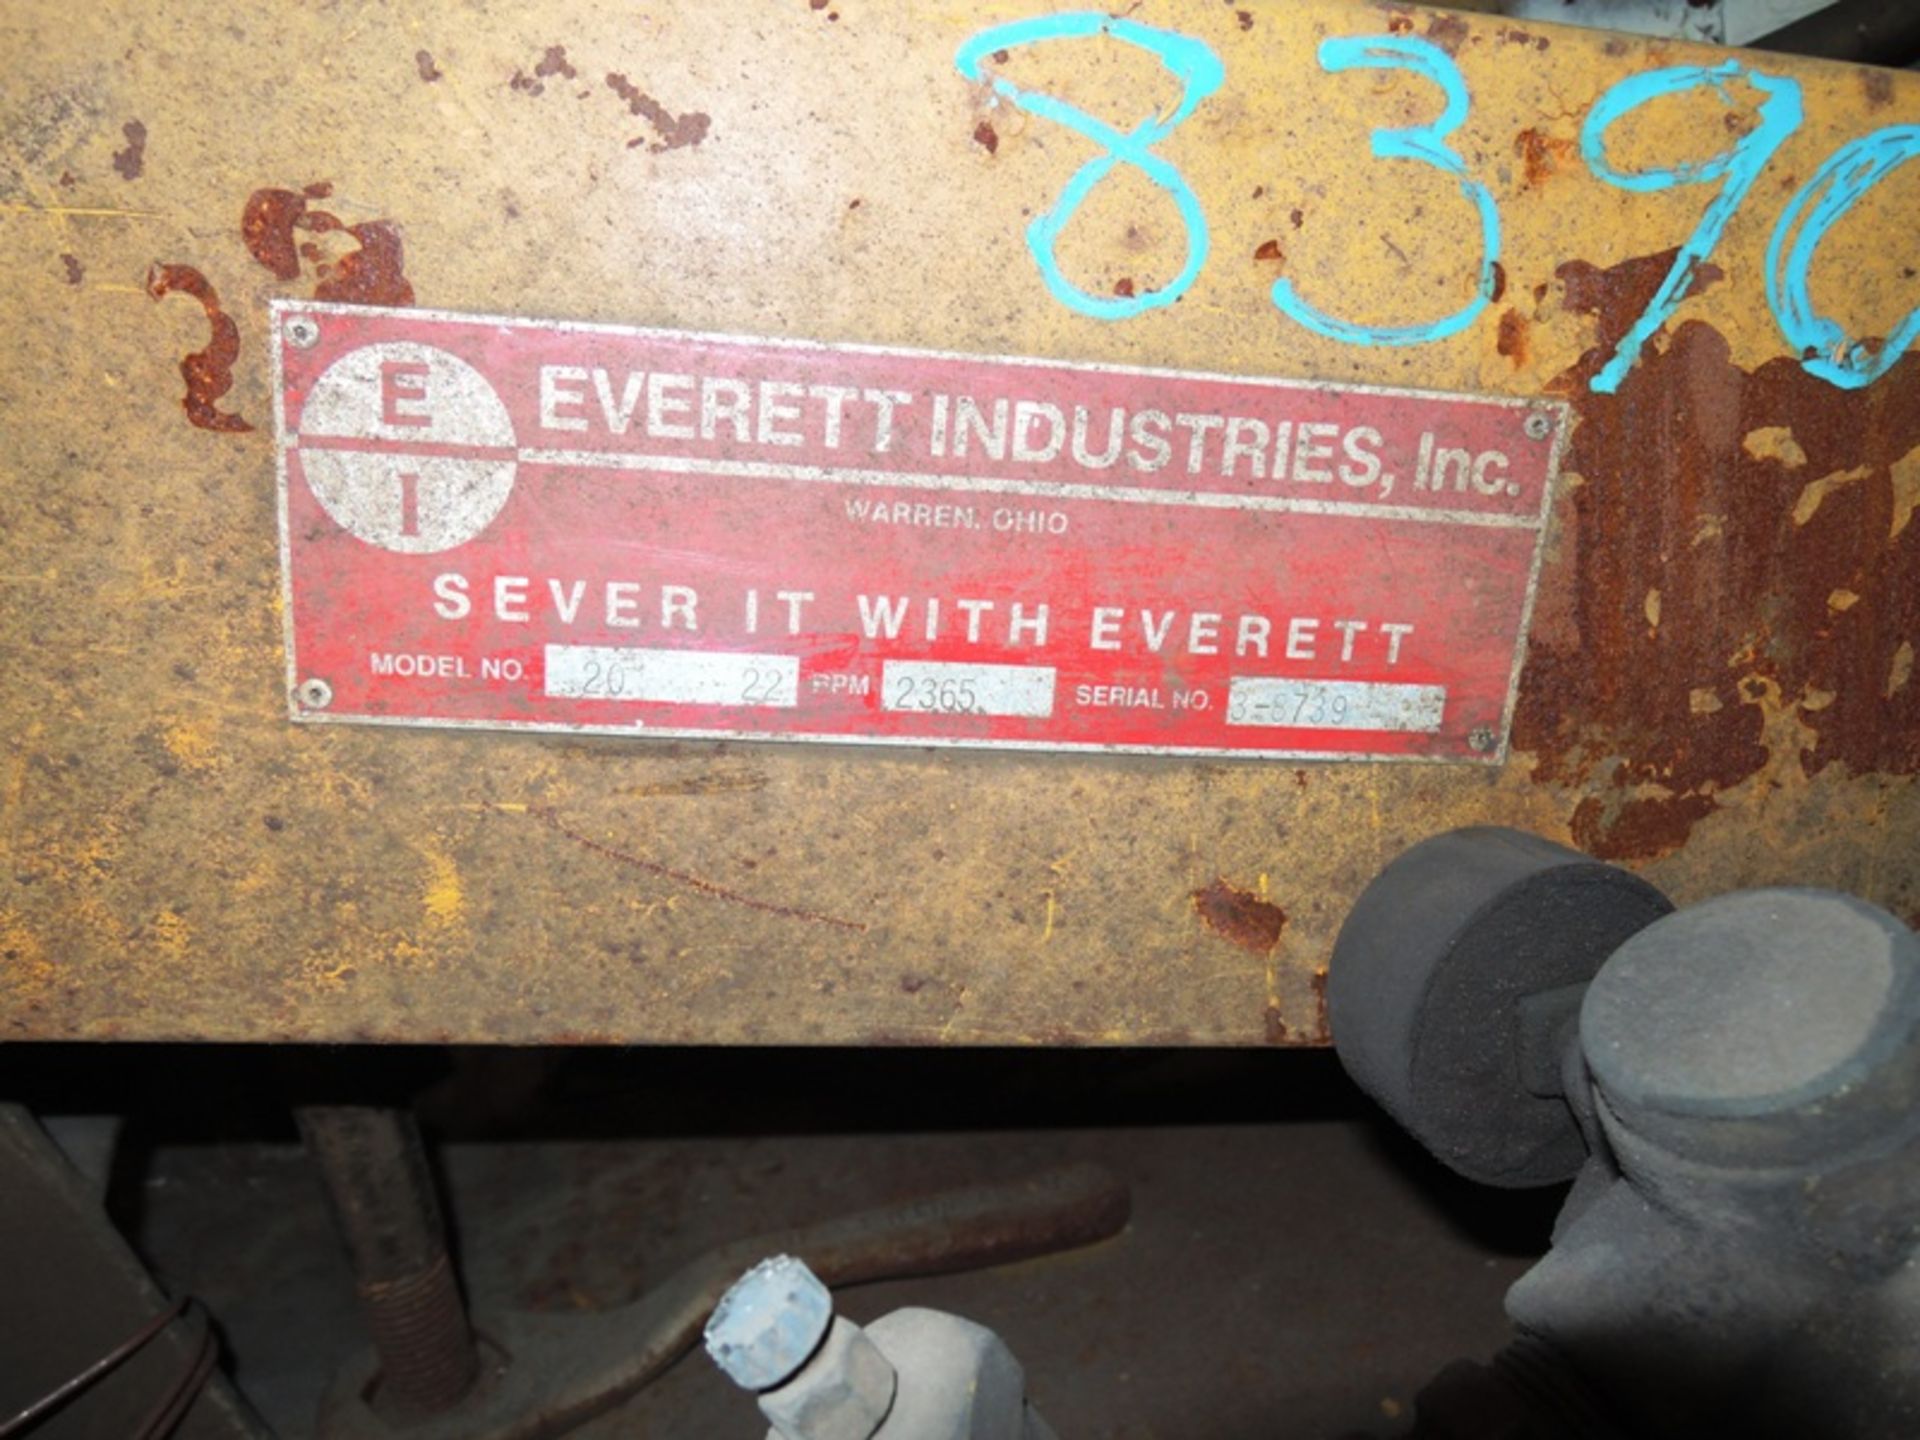 EVERETT MODEL 20-22 CHOP SAW S/N 739 WITH 10 HP DRIVE, 2365 RPM - Image 2 of 2